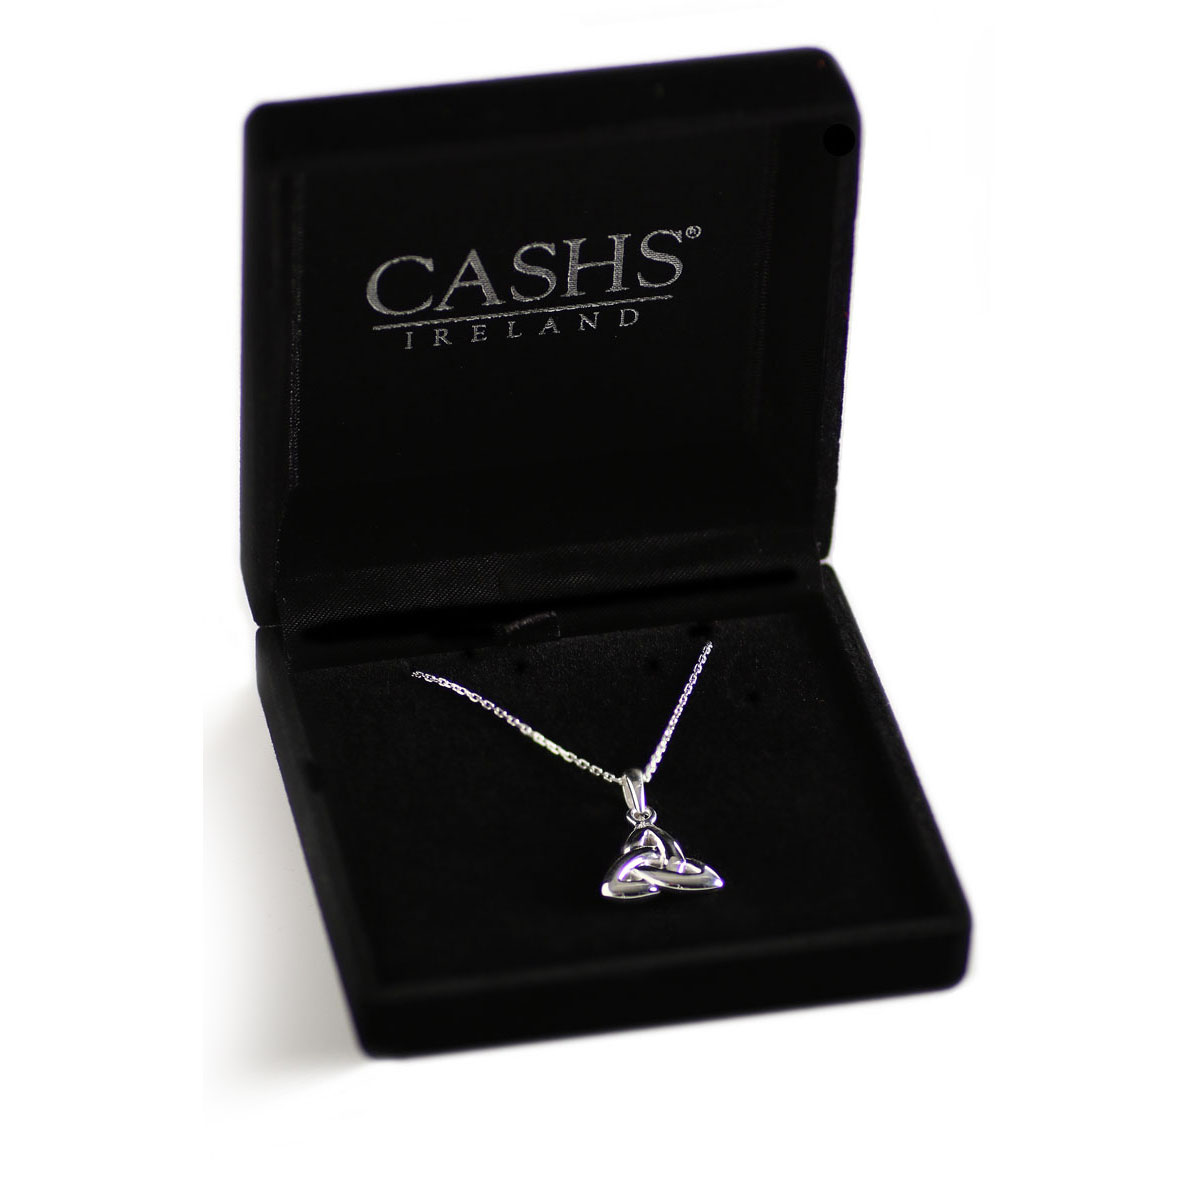 Cashs Ireland, Sterling Silver Trinity Knot Pendant Necklace